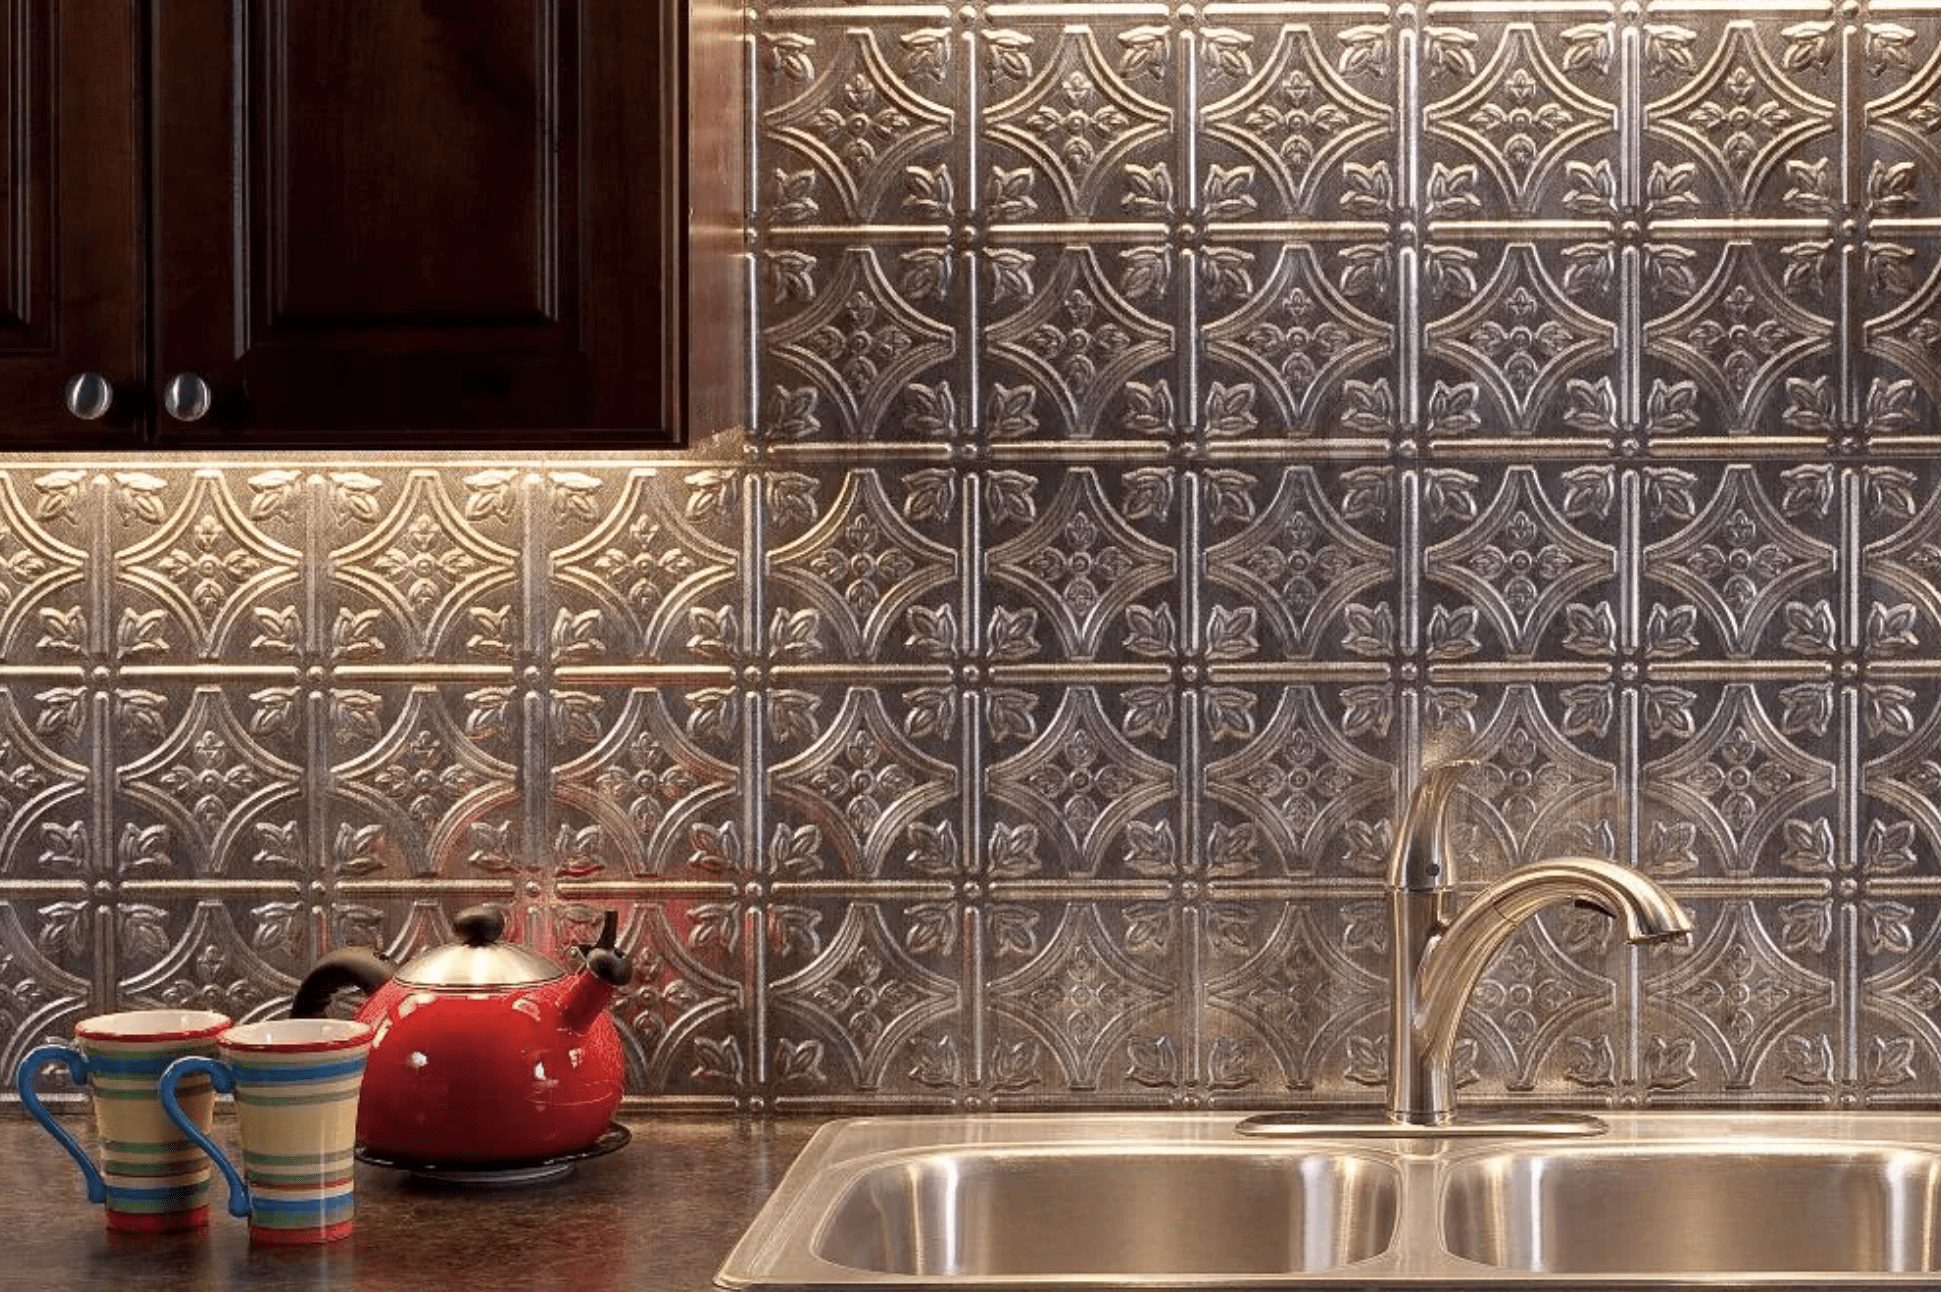 Get the Look of an Expensive Backsplash on a Budget!